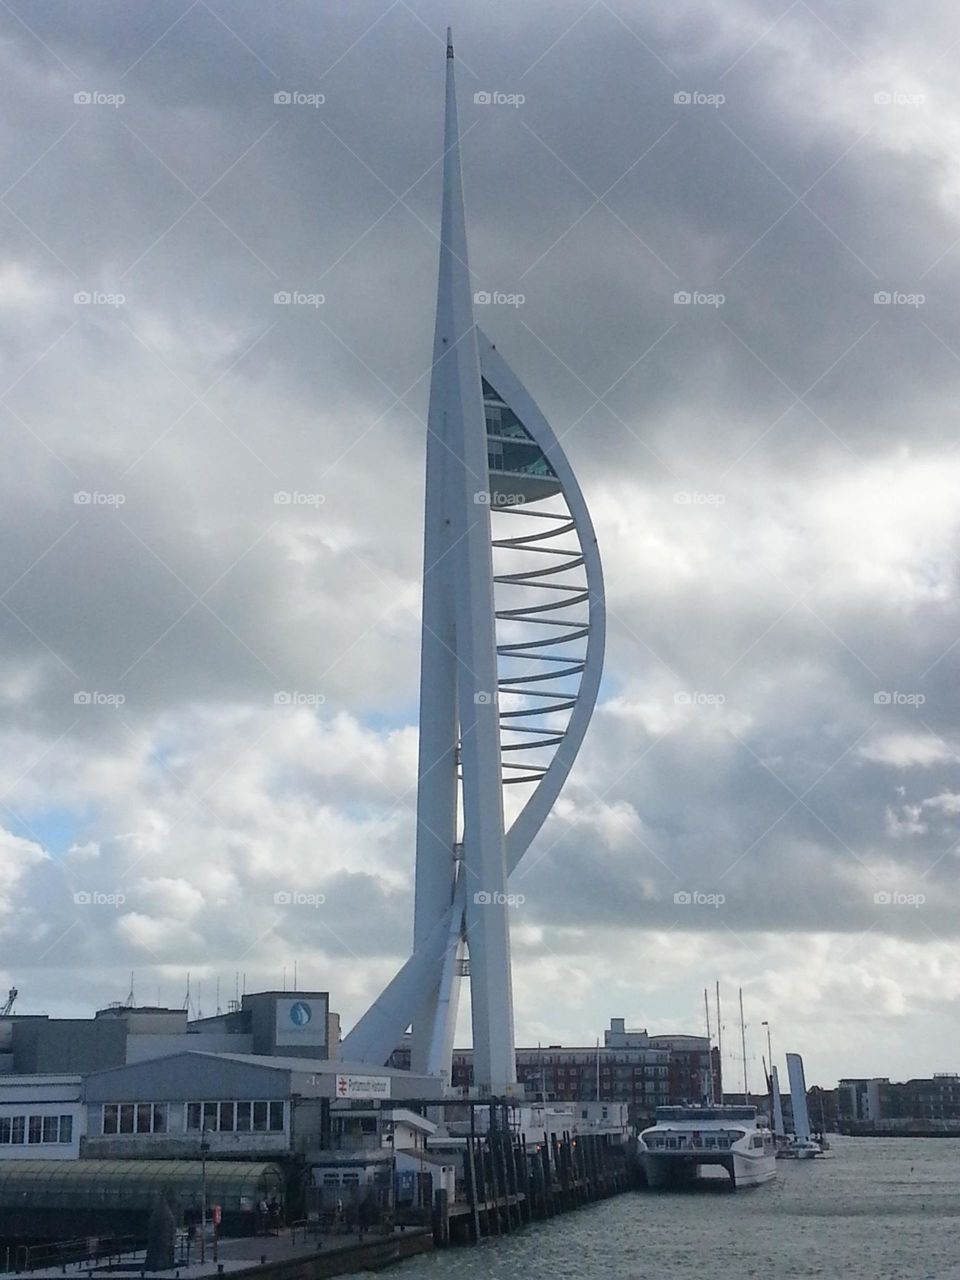 spinnaker tower. traveled to england!